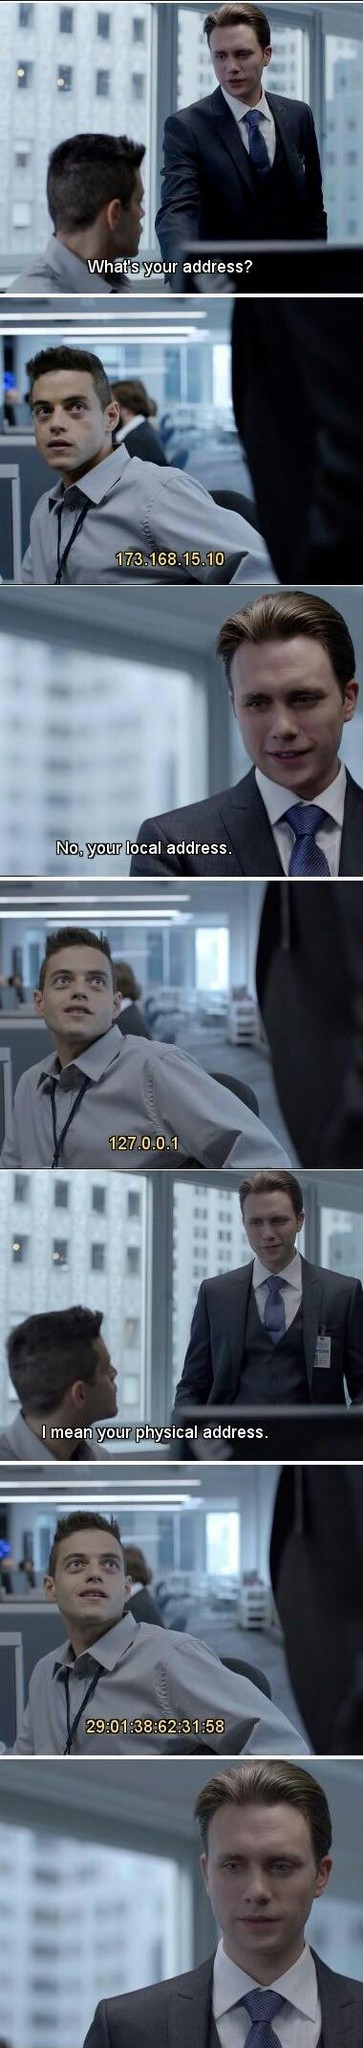 What is your address? - meme